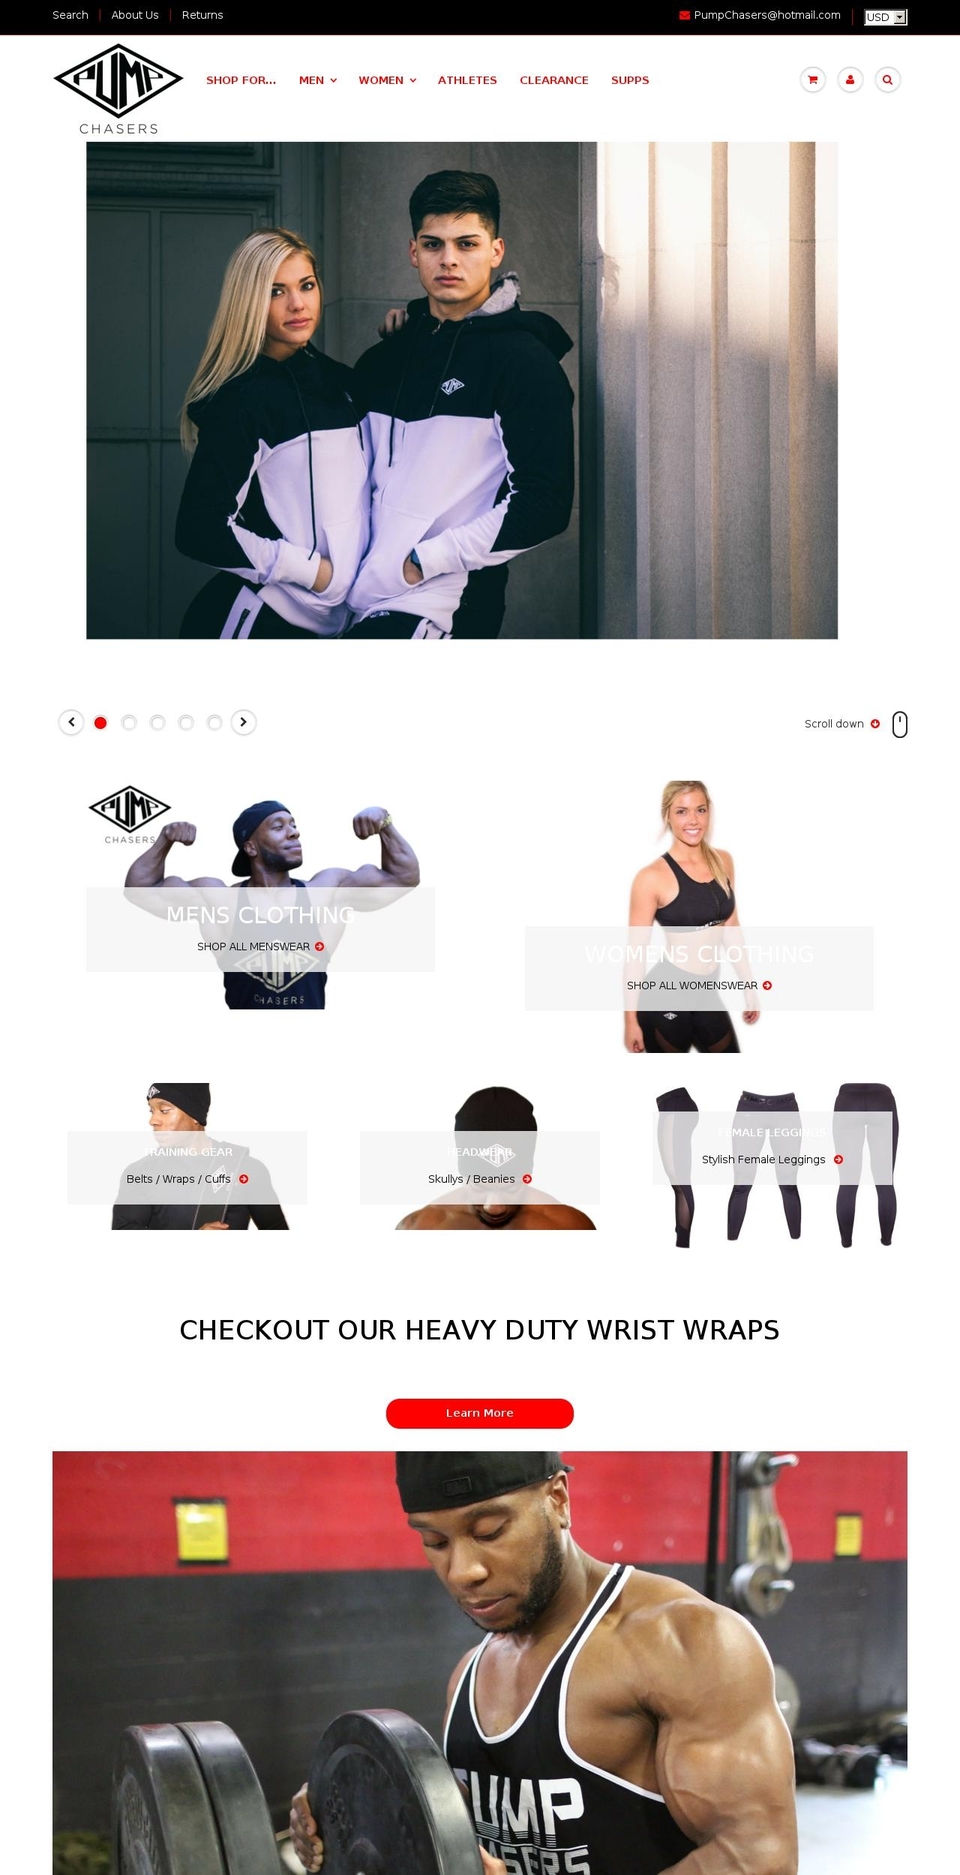 Venture Shopify theme site example pumpchasersclothing.com